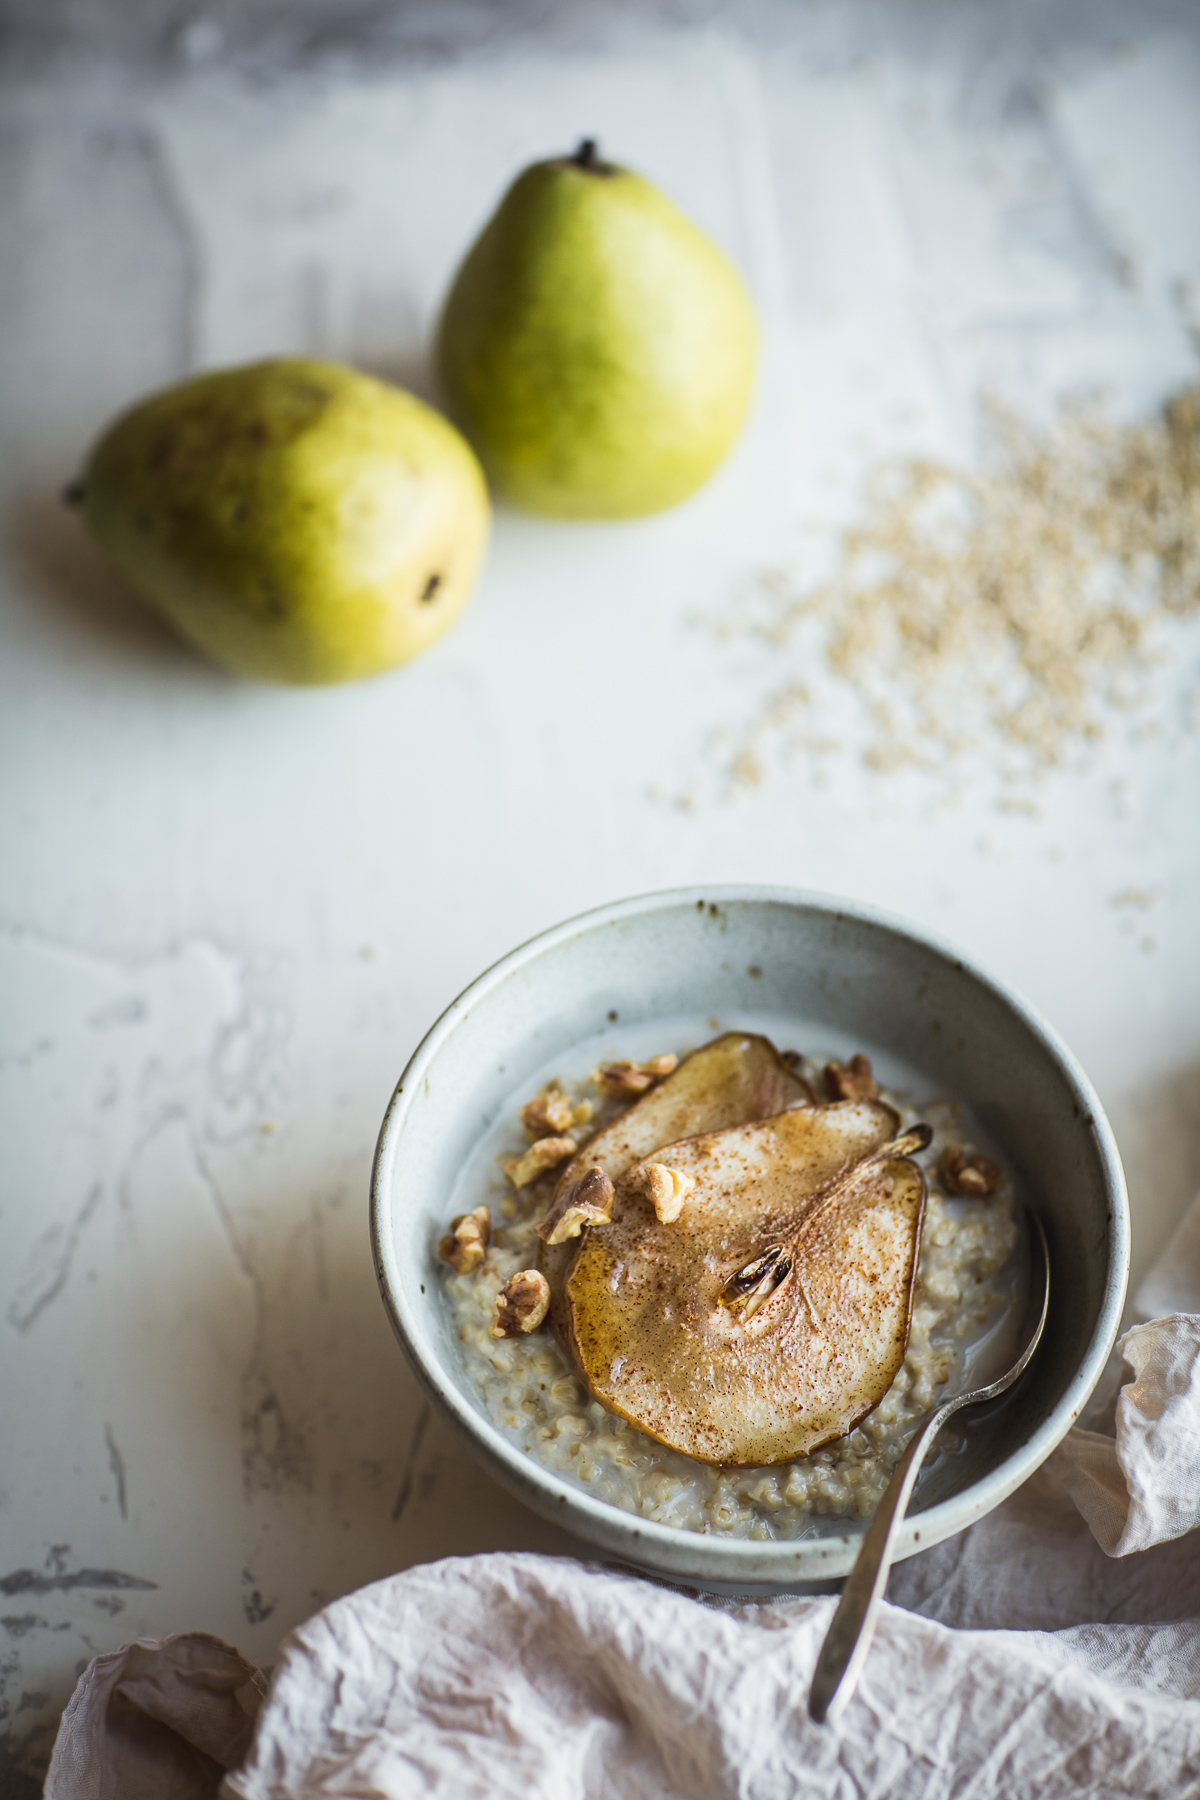 These Creamy Steel Cut Oats with Roasted Pears are a warm and cozy way to start the day.  Made without refined sugar, deliciously vegan and naturally gluten-free. From @tasteLUVnourish